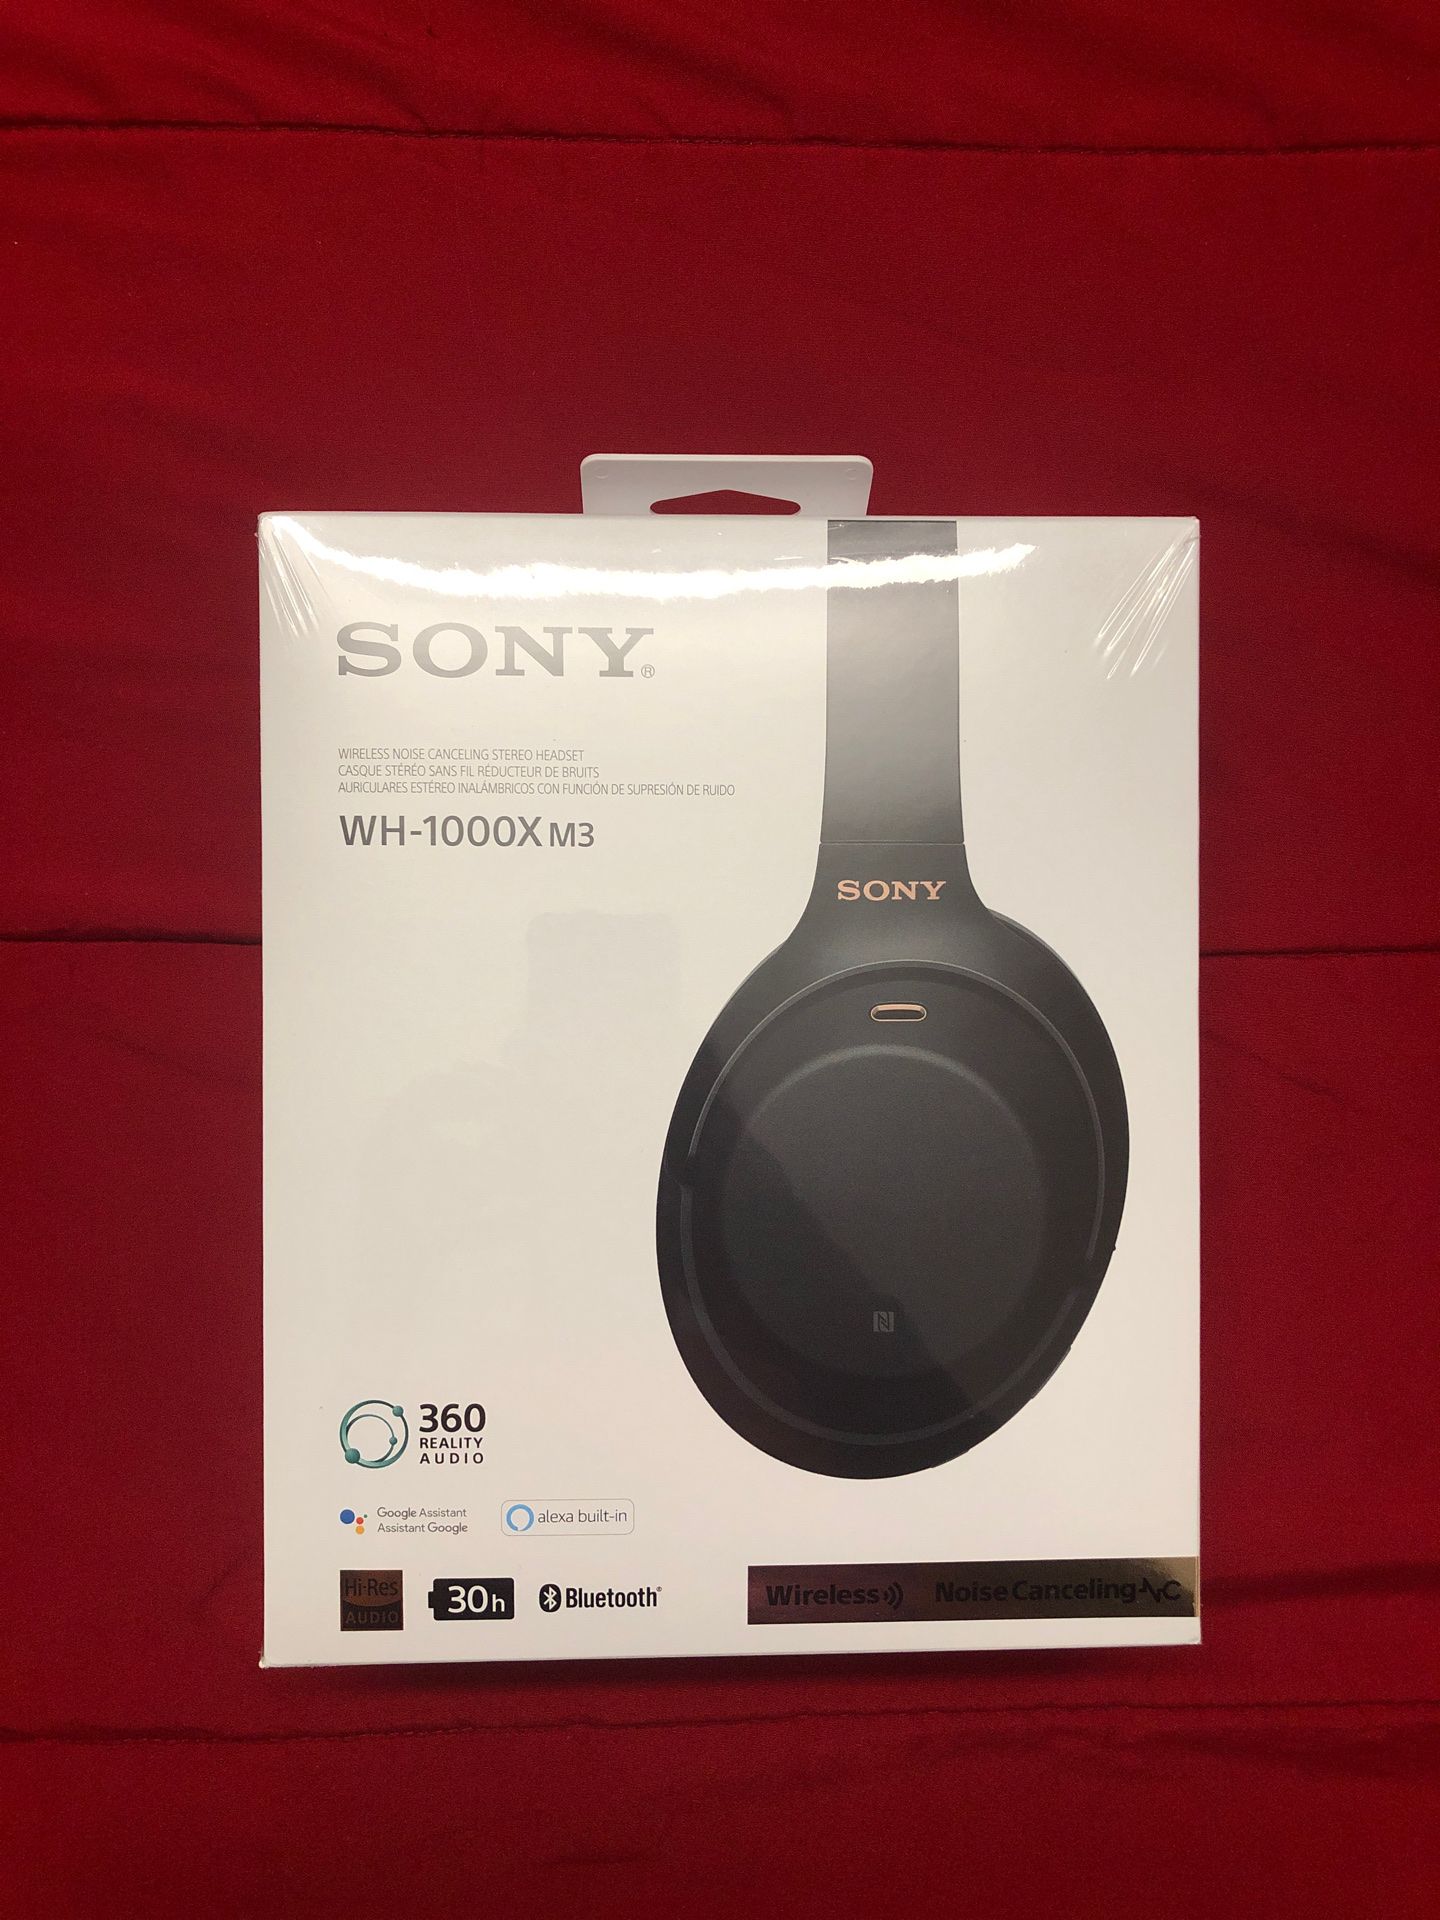 Sony WH-1000XM3 Noise-Cancelling Headphones New & Unboxed